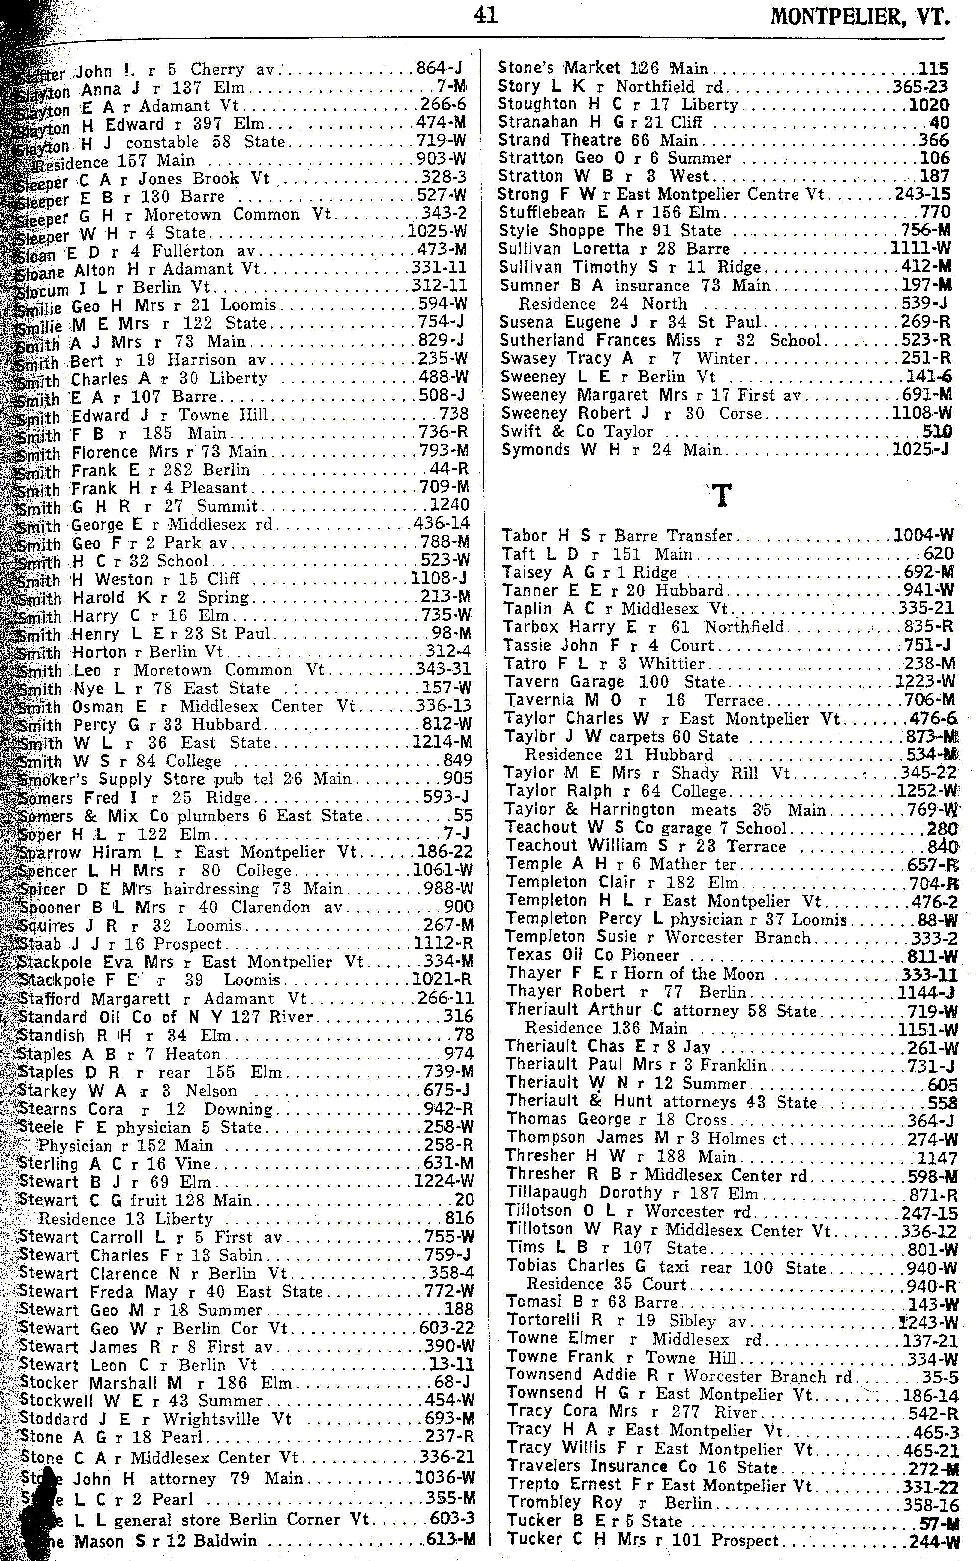 1928 Montpelier Vt Telephone Book - Page 41